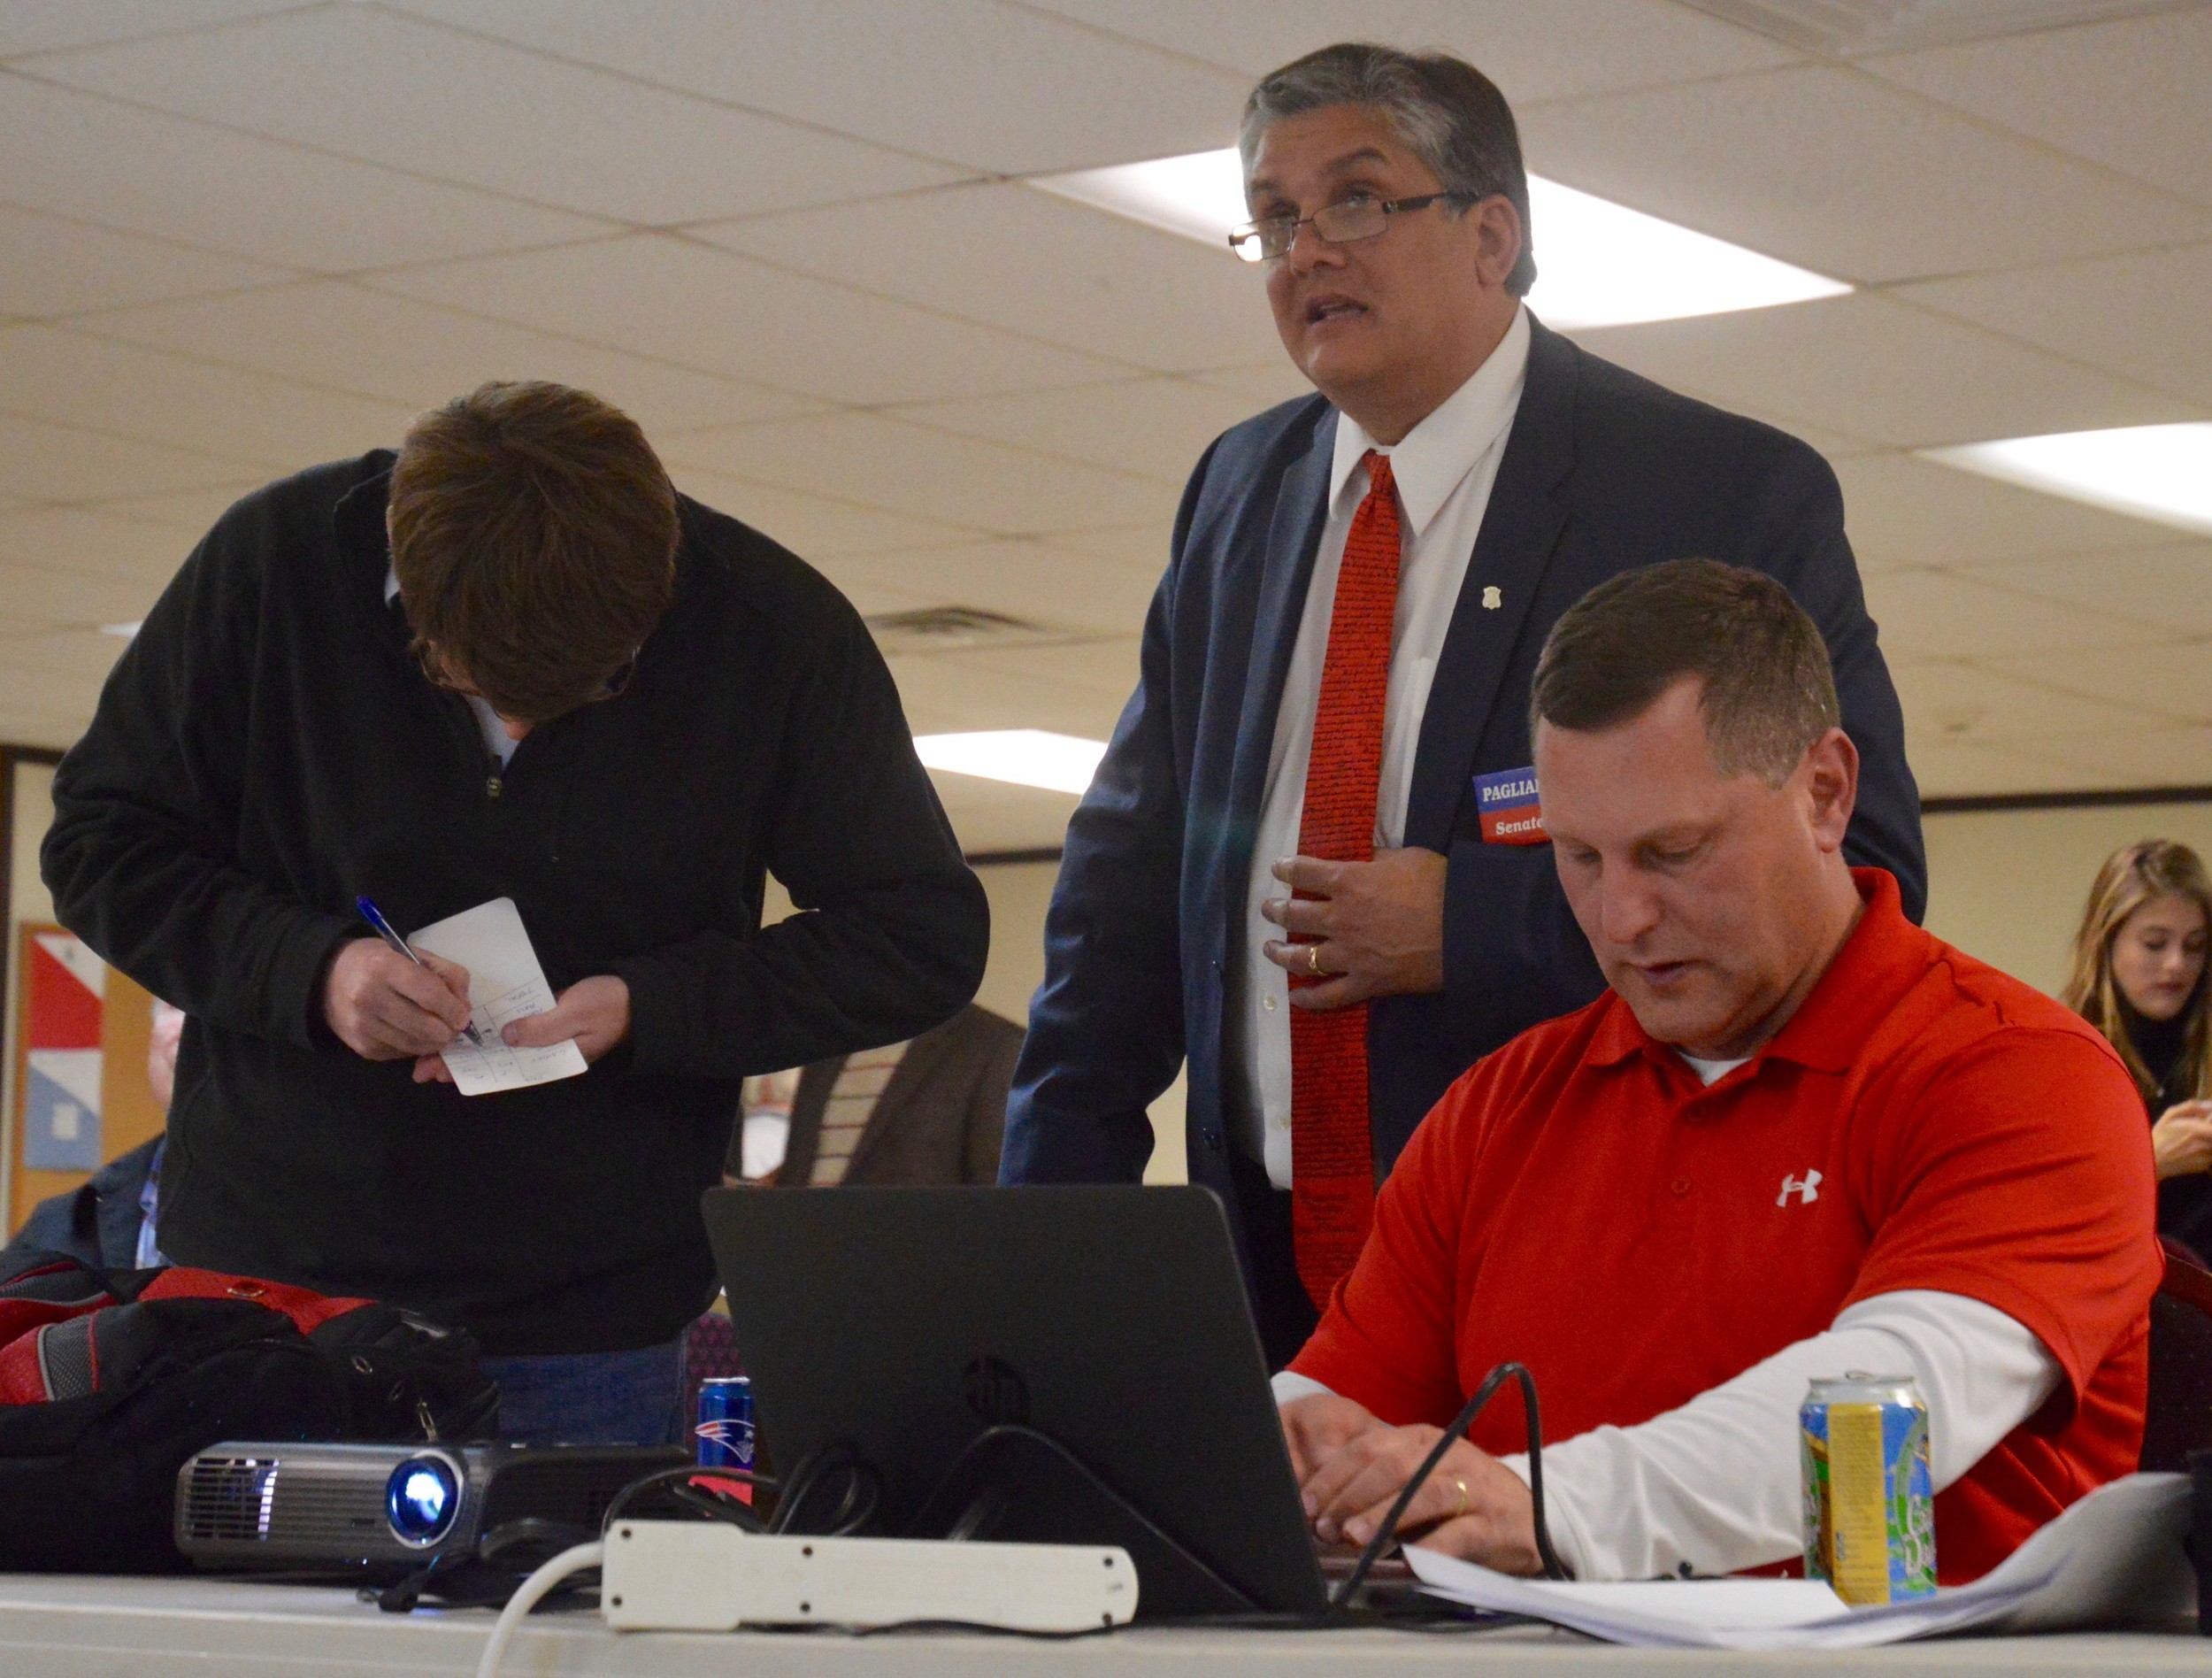 Sen. John Pagliarini Jr. (center) watches the numbers come in at the Republicans’ election night headquarters at St. John's Masonic Lodge Nov. 8. He’s flanked by Rep. Daniel P. Reilly (left), who didn’t run for re-election, and Town Council President Keith Hamilton, who retained his seat. Mr. Pagliarini lost to James Seveney in the District 11 Senate race.